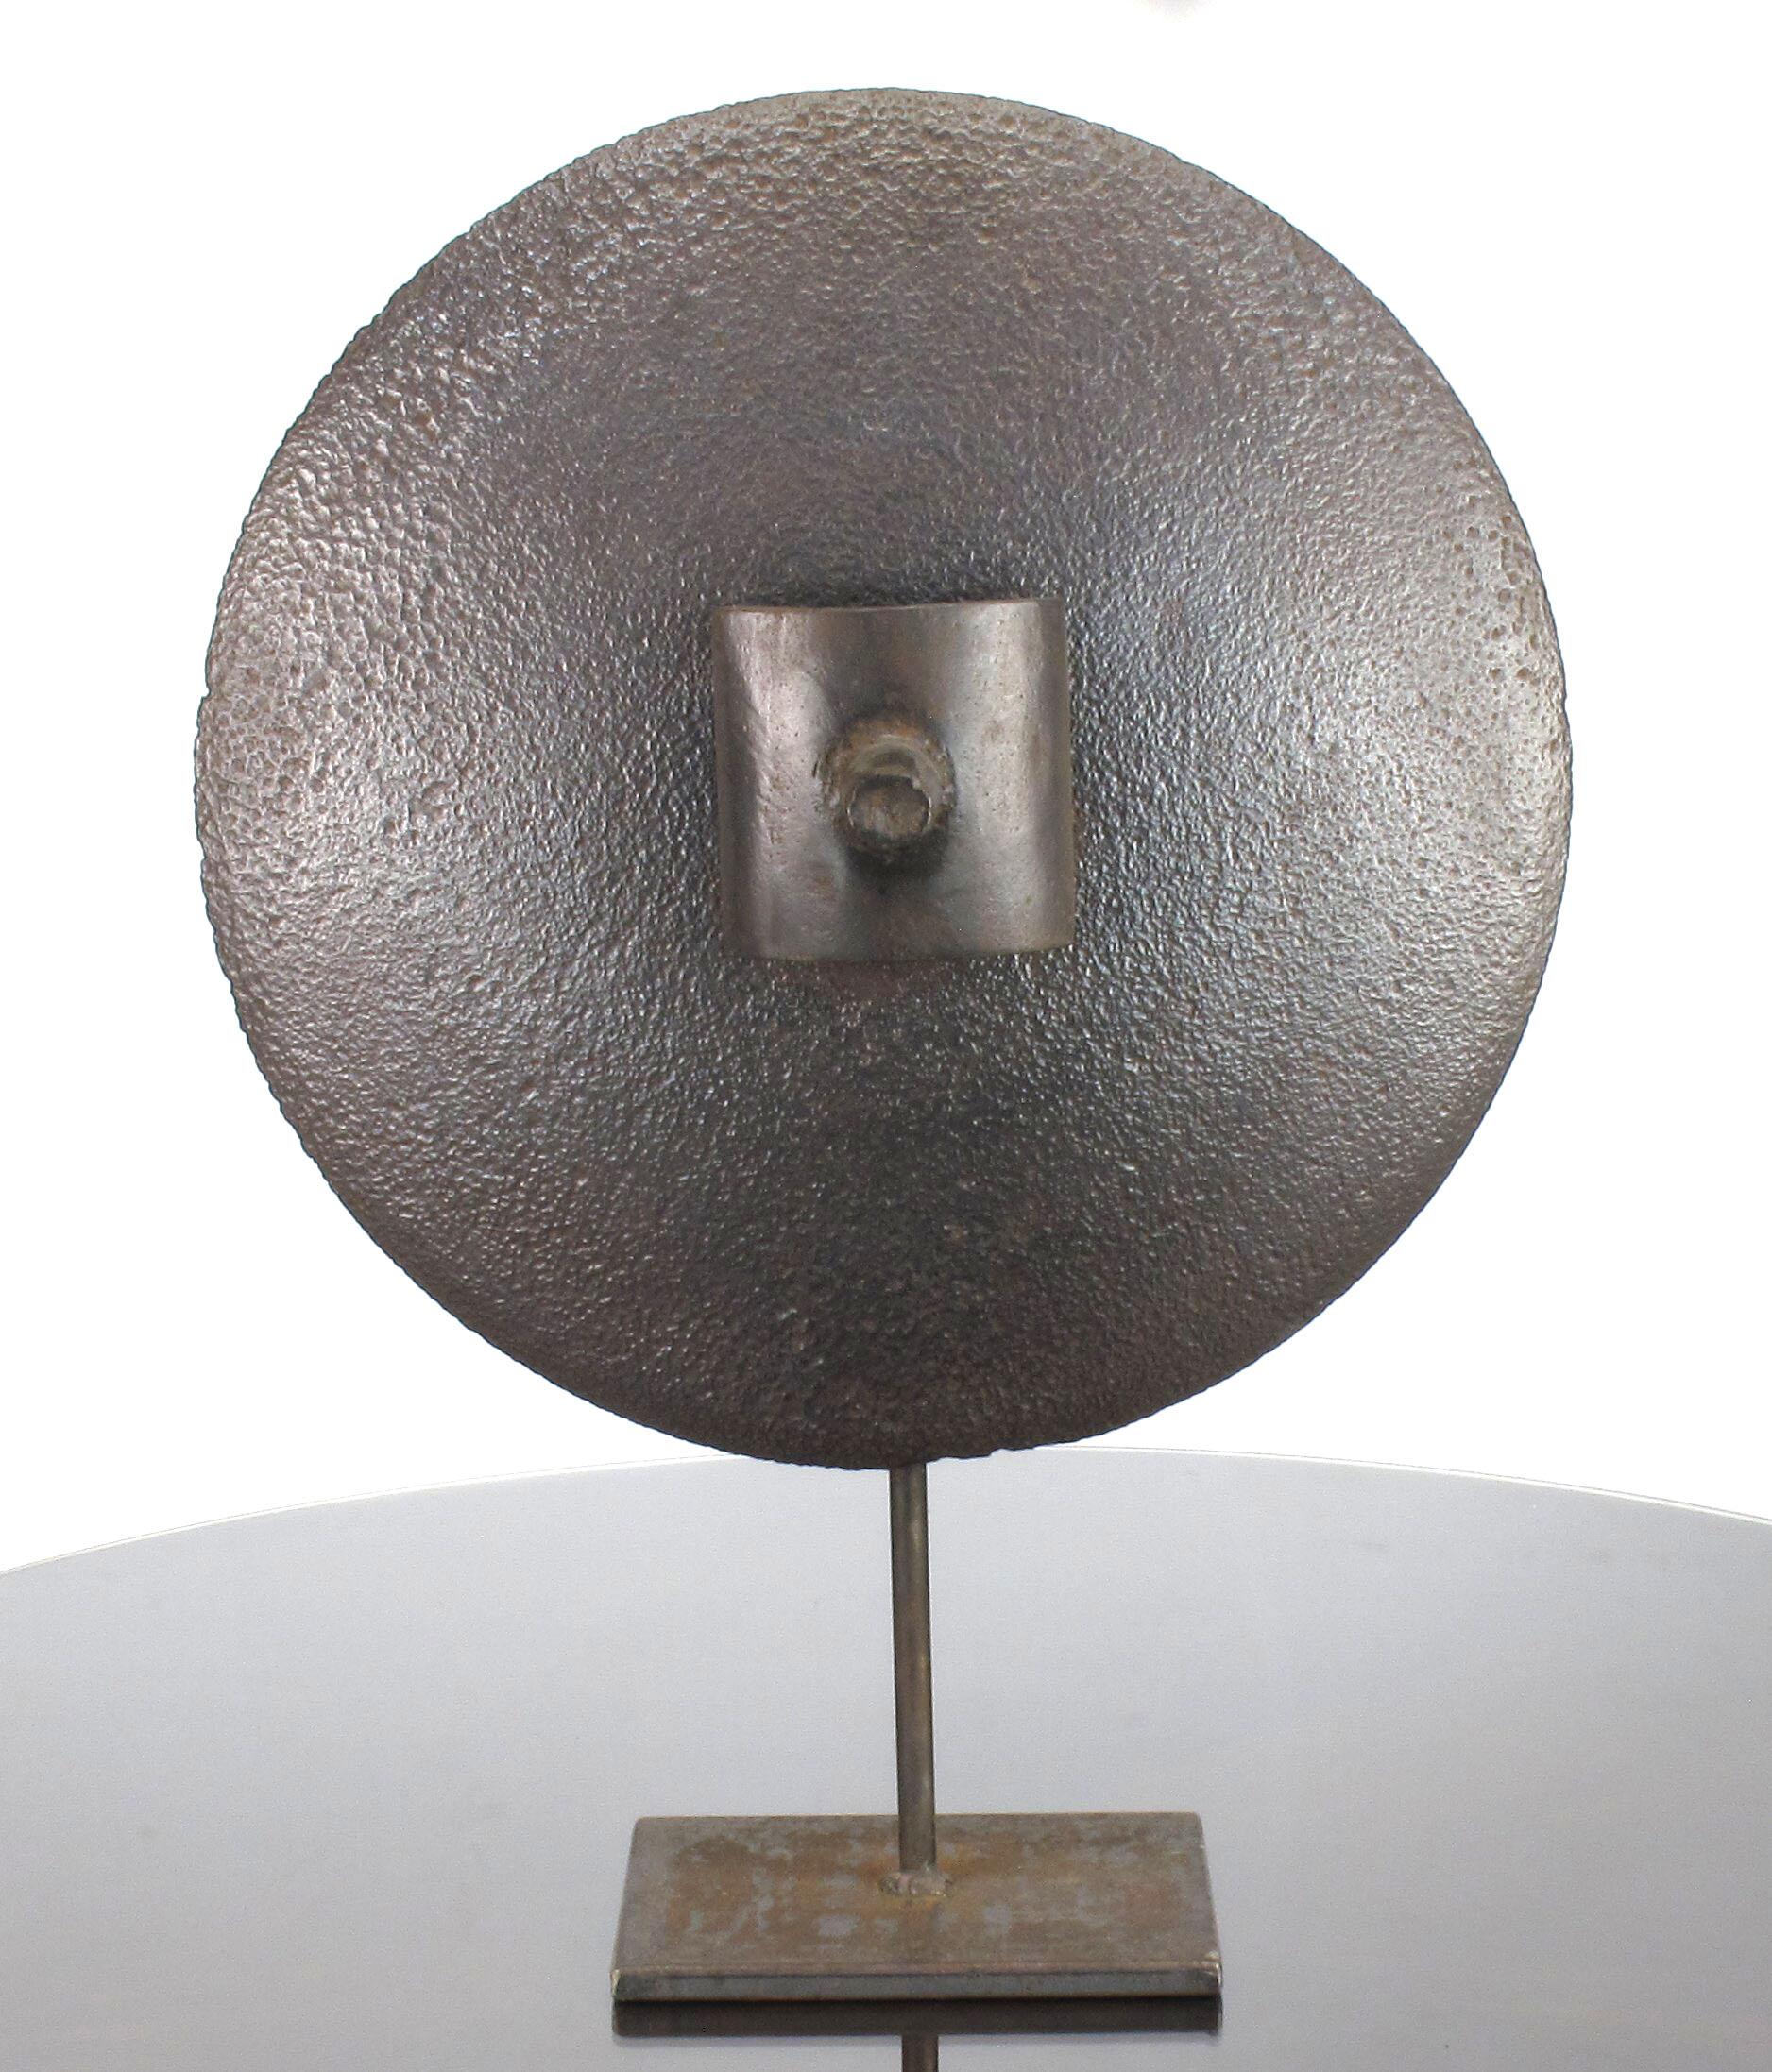 Striking hand-hammered iron disc sculpture with floating center handle. Constructed of various iron pieces that were handwrought and welded together to create a floating 18